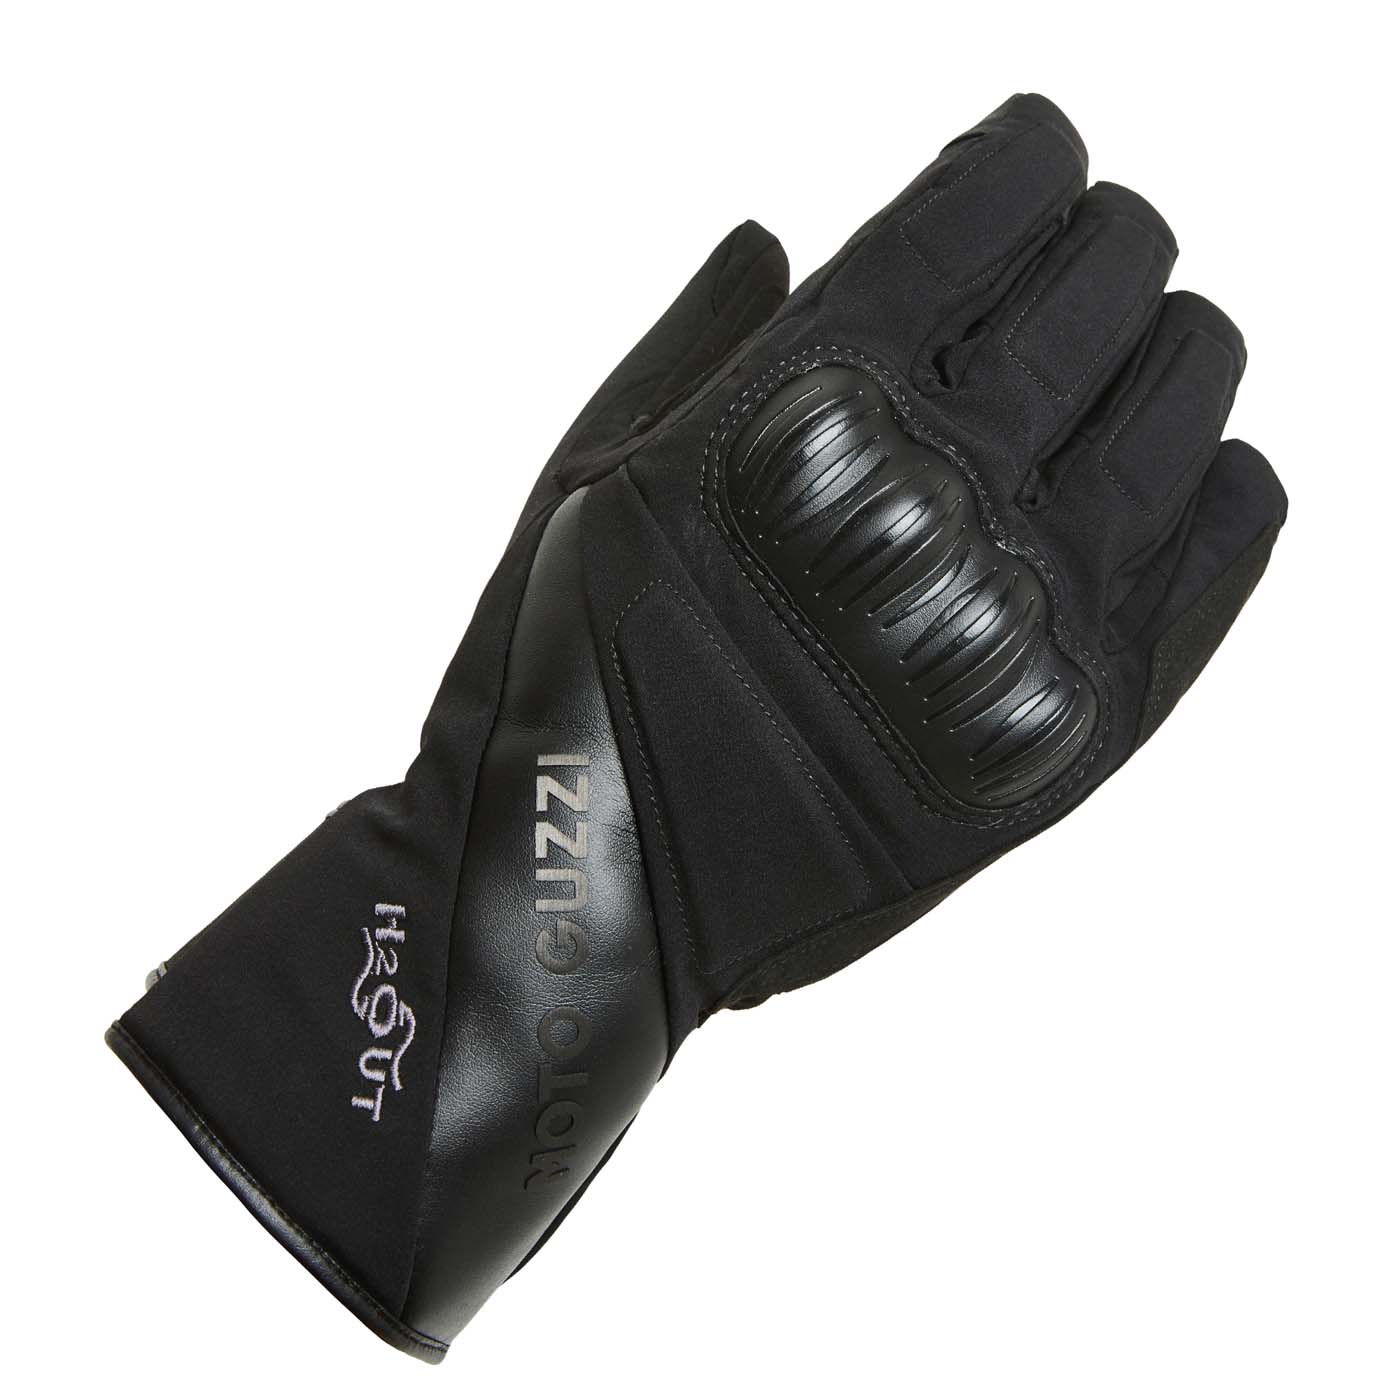 Leather Waterproof Motorcycle Winter Gloves for Men Women Warm Thermal Guantes  Moto Invierno Hombre Impermeable Gant Moto Hiver